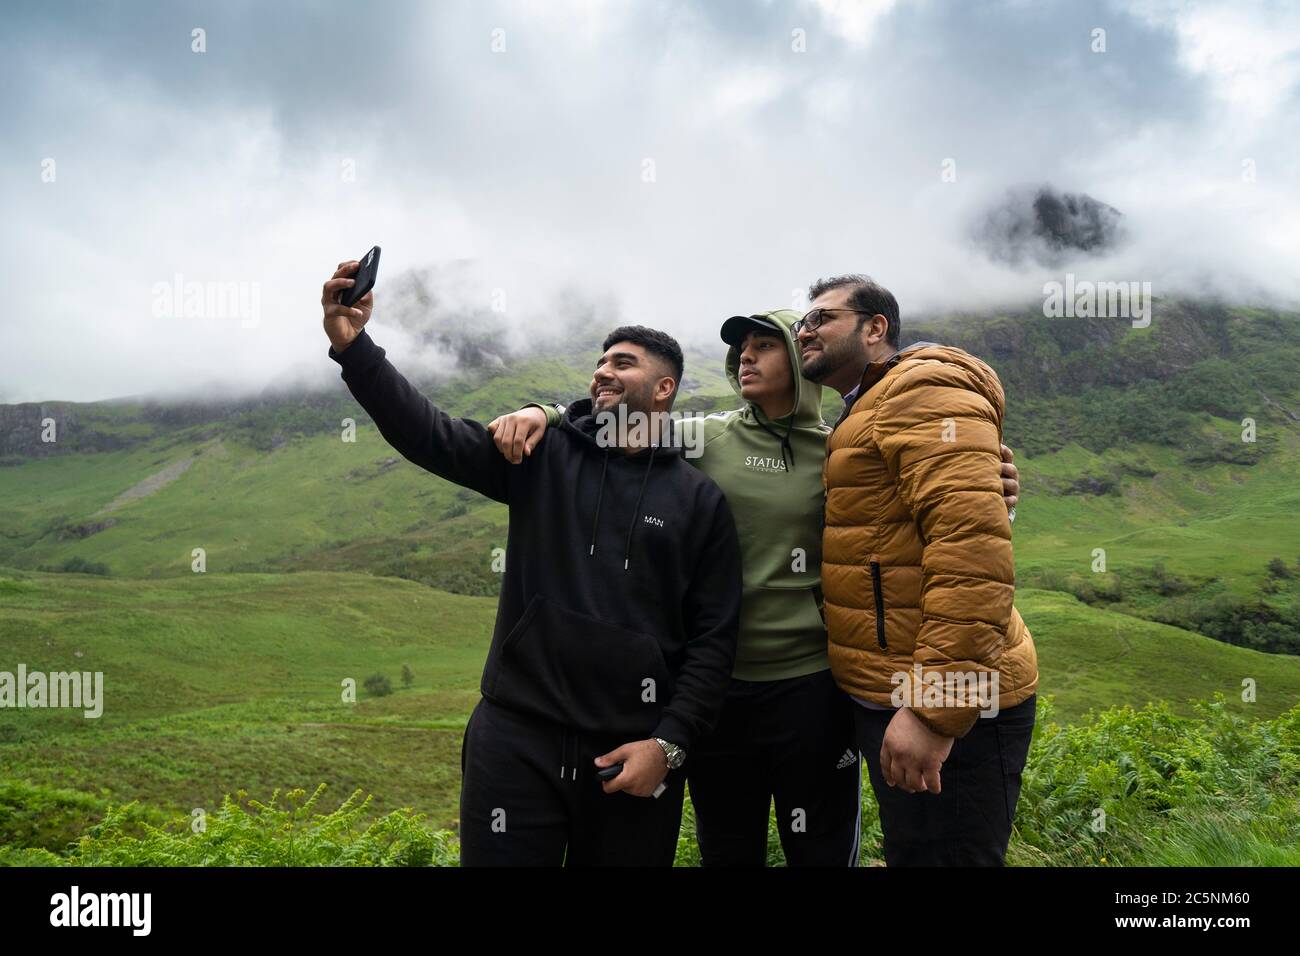 Glen Coe, Scotland, UK. 4 July, 2020. Tourists travel to Glen Coe on first weekend after 5 mile travel restriction was lifted by the Scottish Government. Pictured; Indian day-trippers take selfie photograph with spectacular mountain backdrop in Glen Coe.  Iain Masterton/Alamy Live News Stock Photo